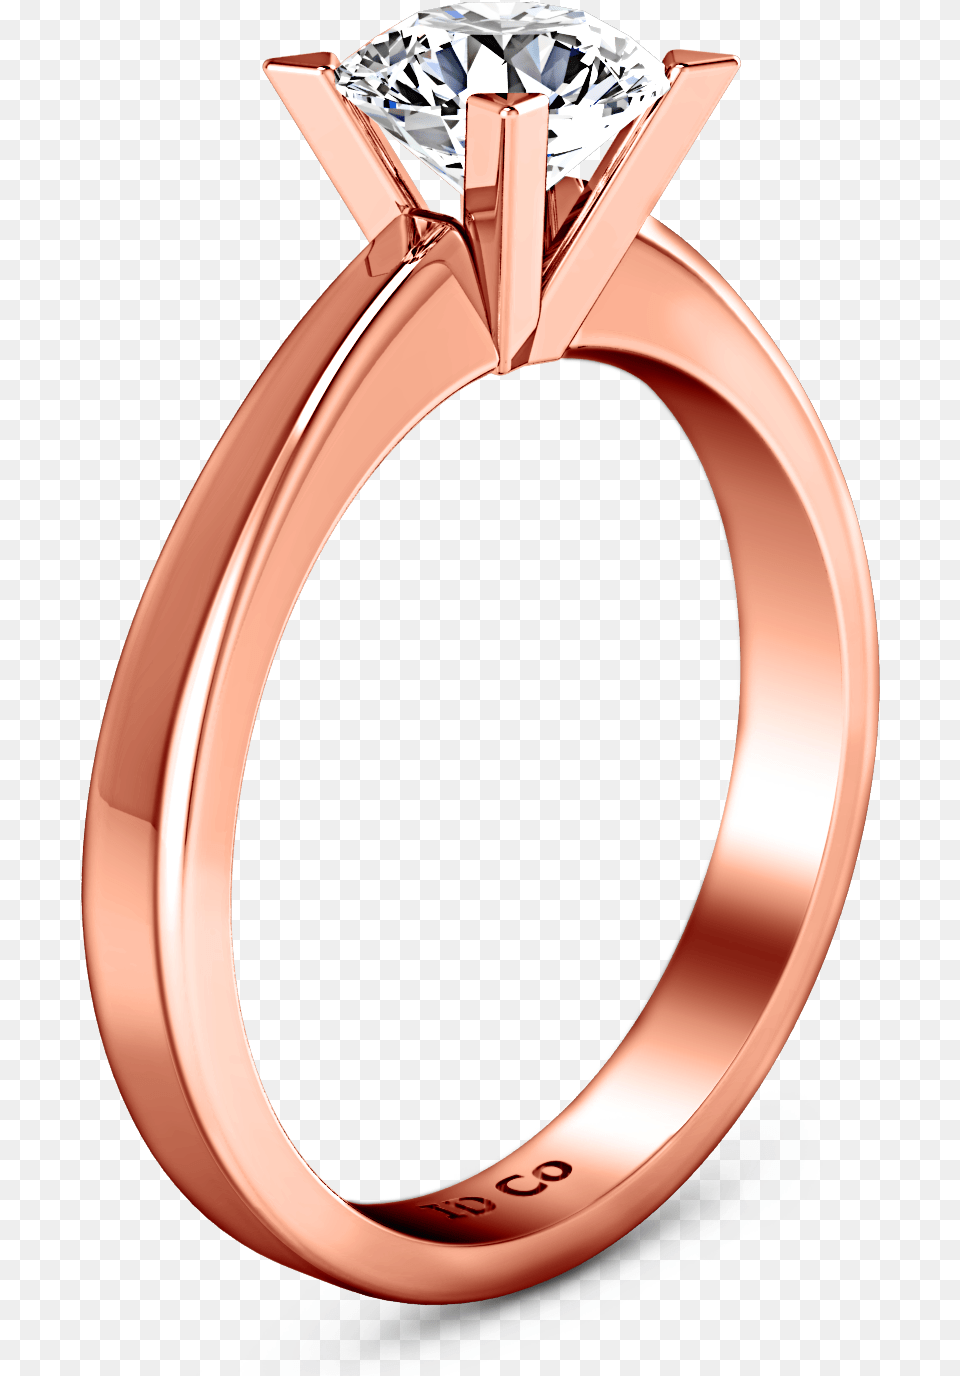 Solitaire Engagement Ring Icon 14k Rose Gold Engagement Ring, Accessories, Jewelry, Diamond, Gemstone Png